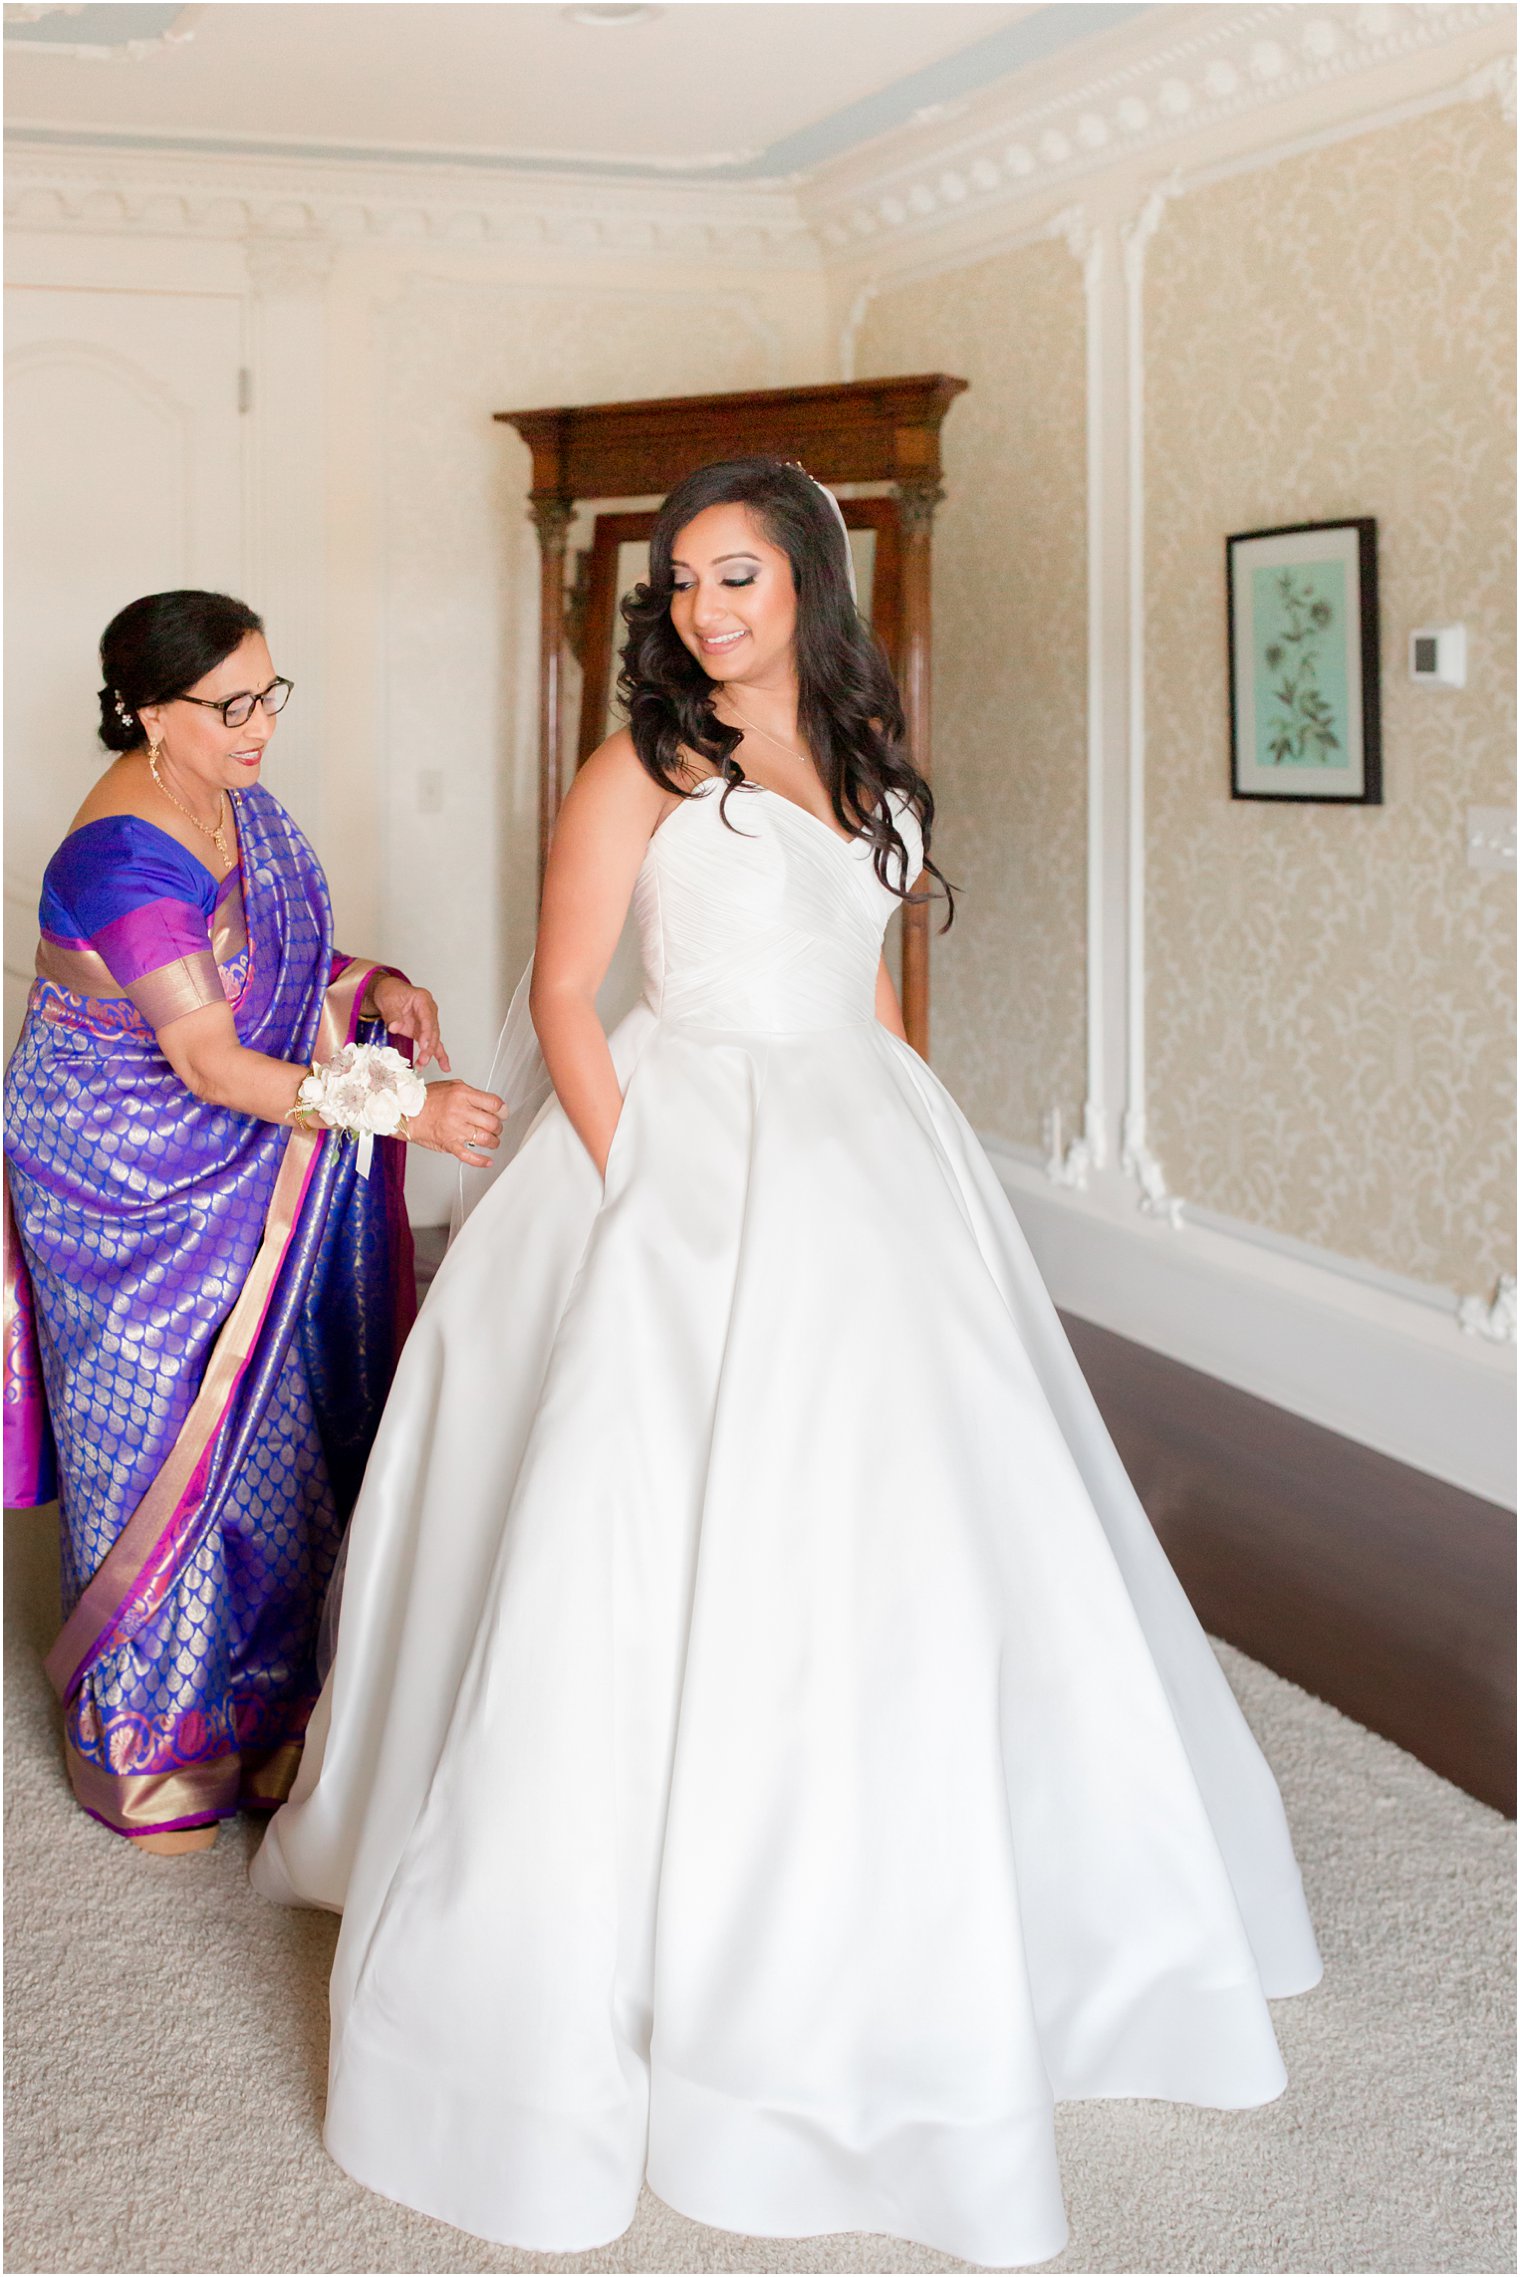 Bride getting ready with her mother on wedding morning